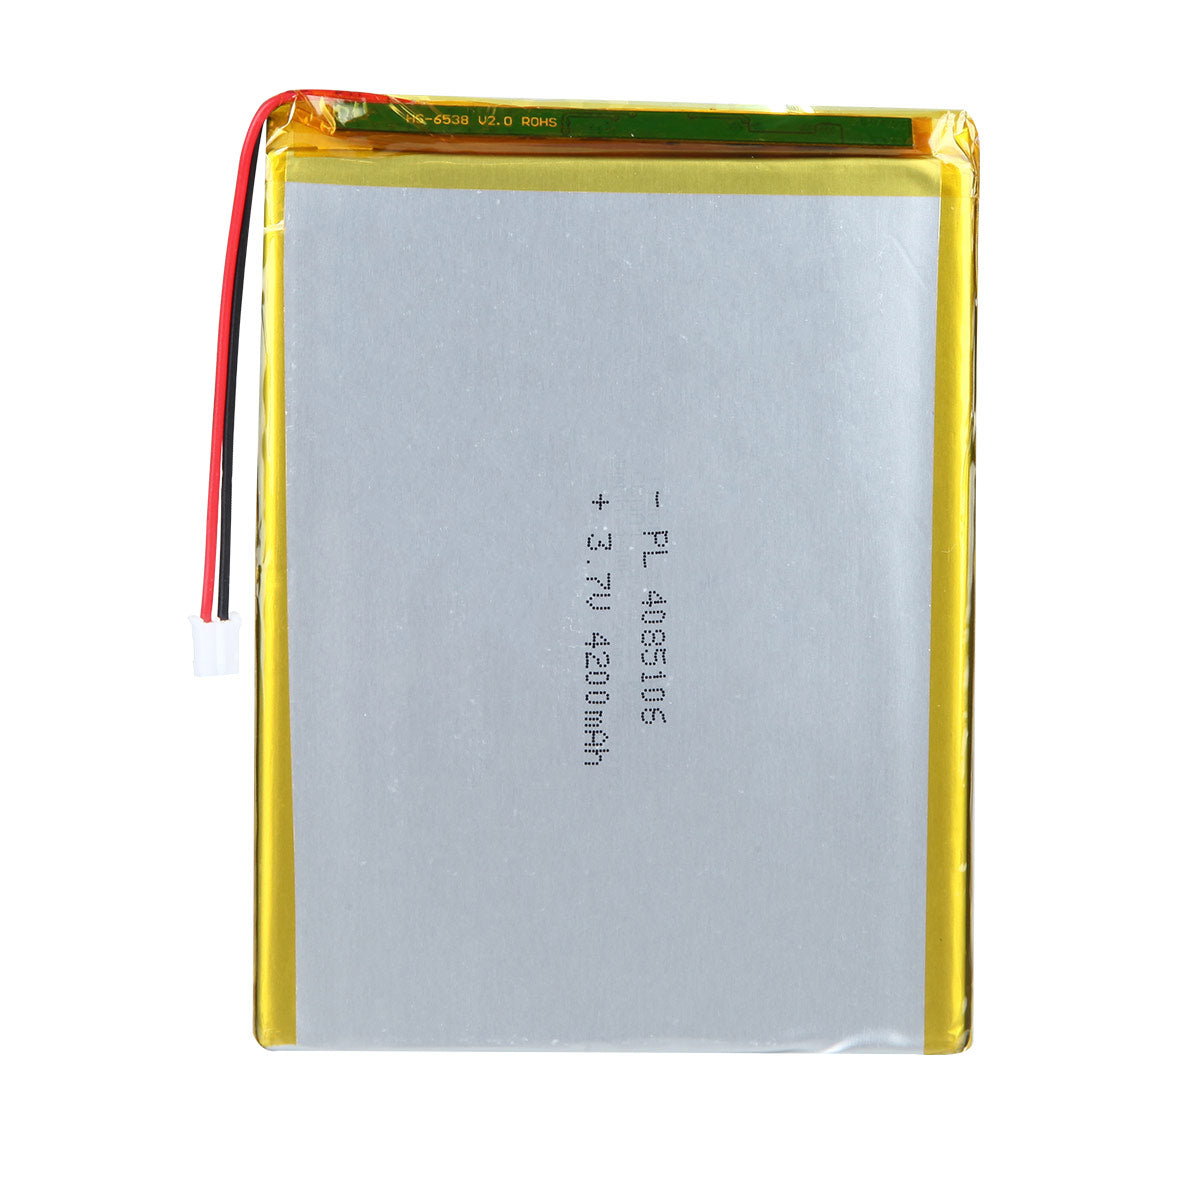 YDL 3.7V 4200mAh 4085106 Rechargeable Lithium Polymer Battery Length 108mm